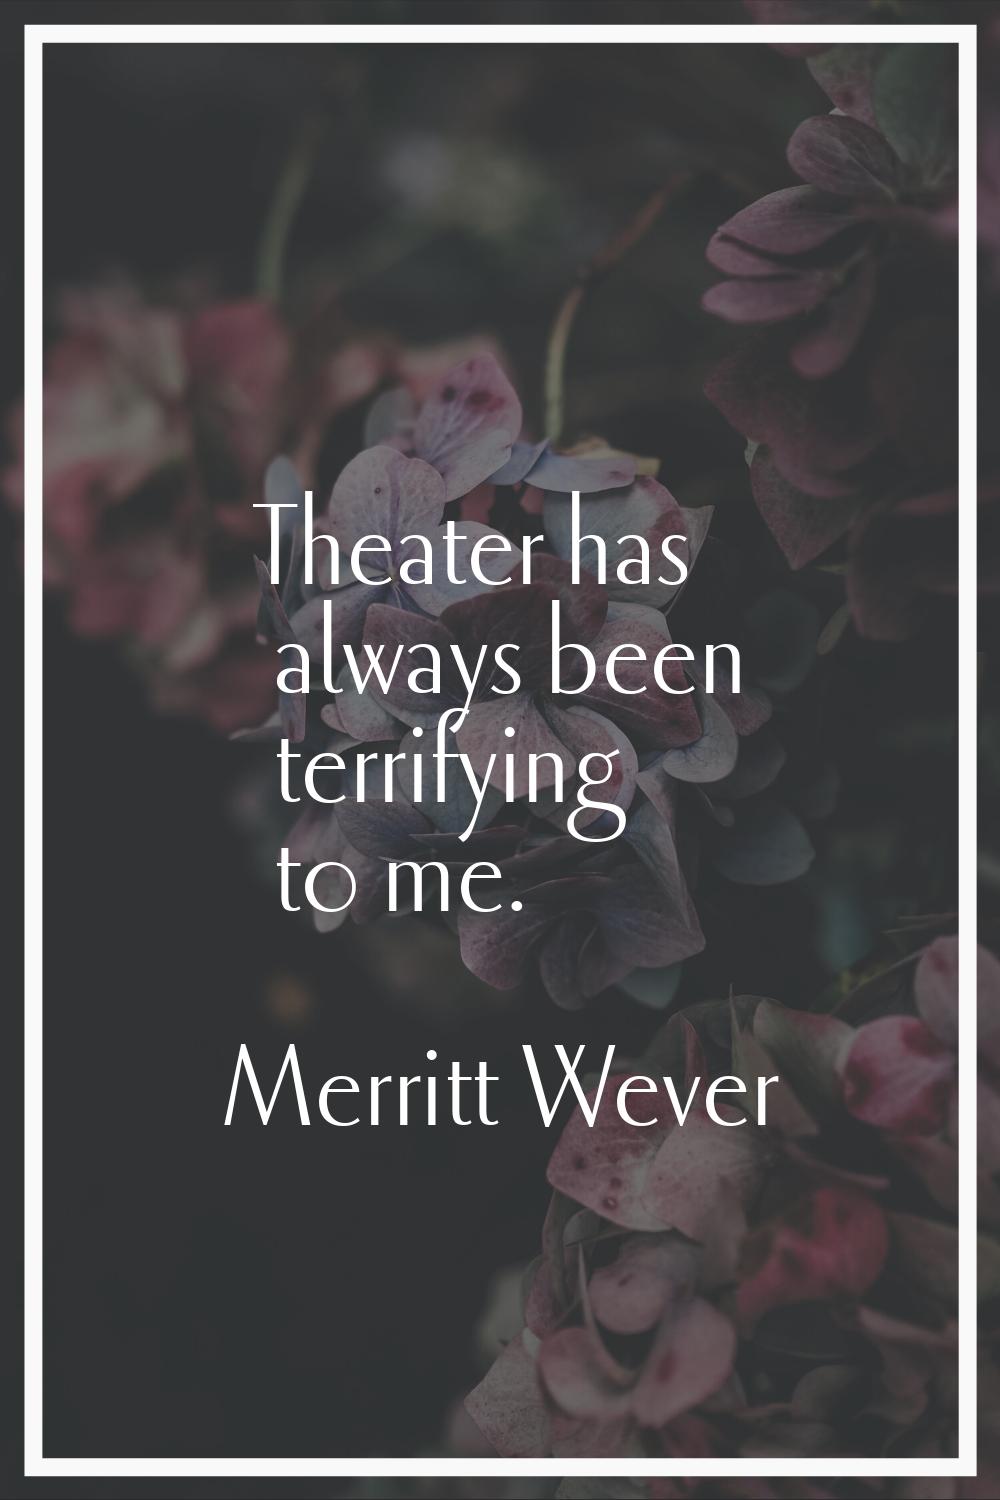 Theater has always been terrifying to me.